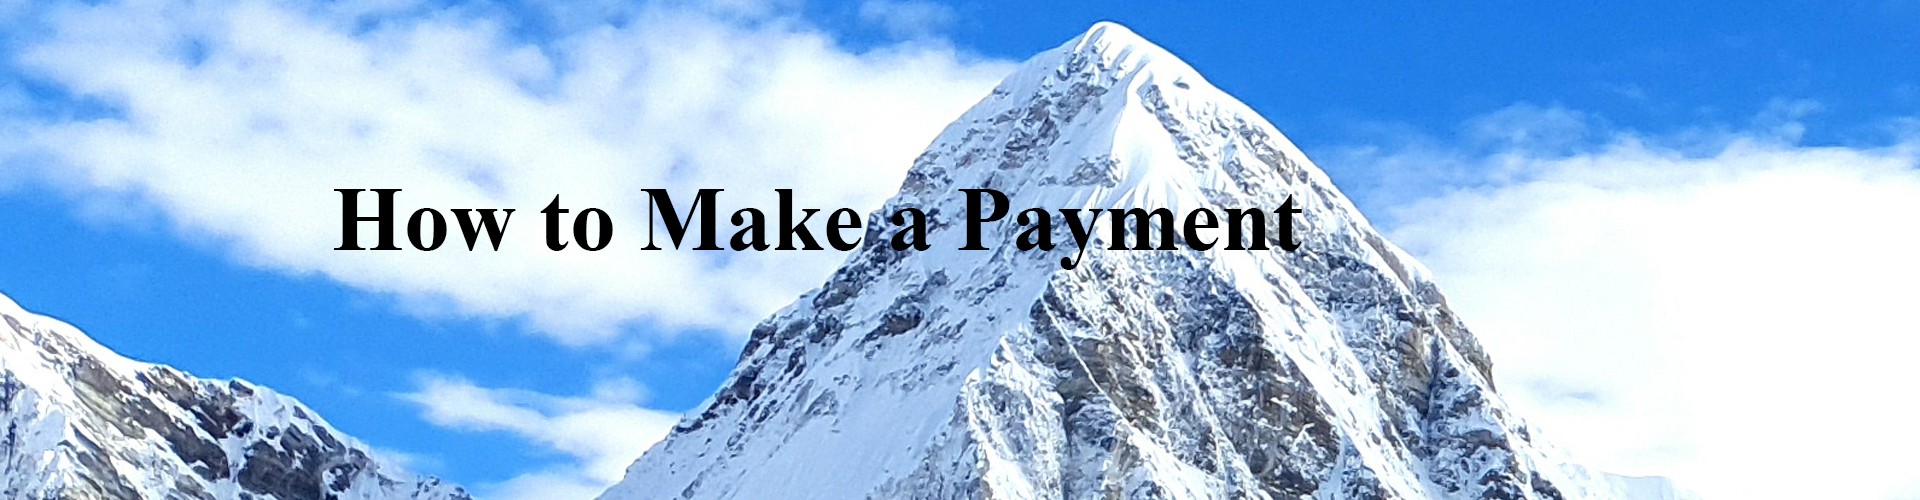 How to Make a Payment?